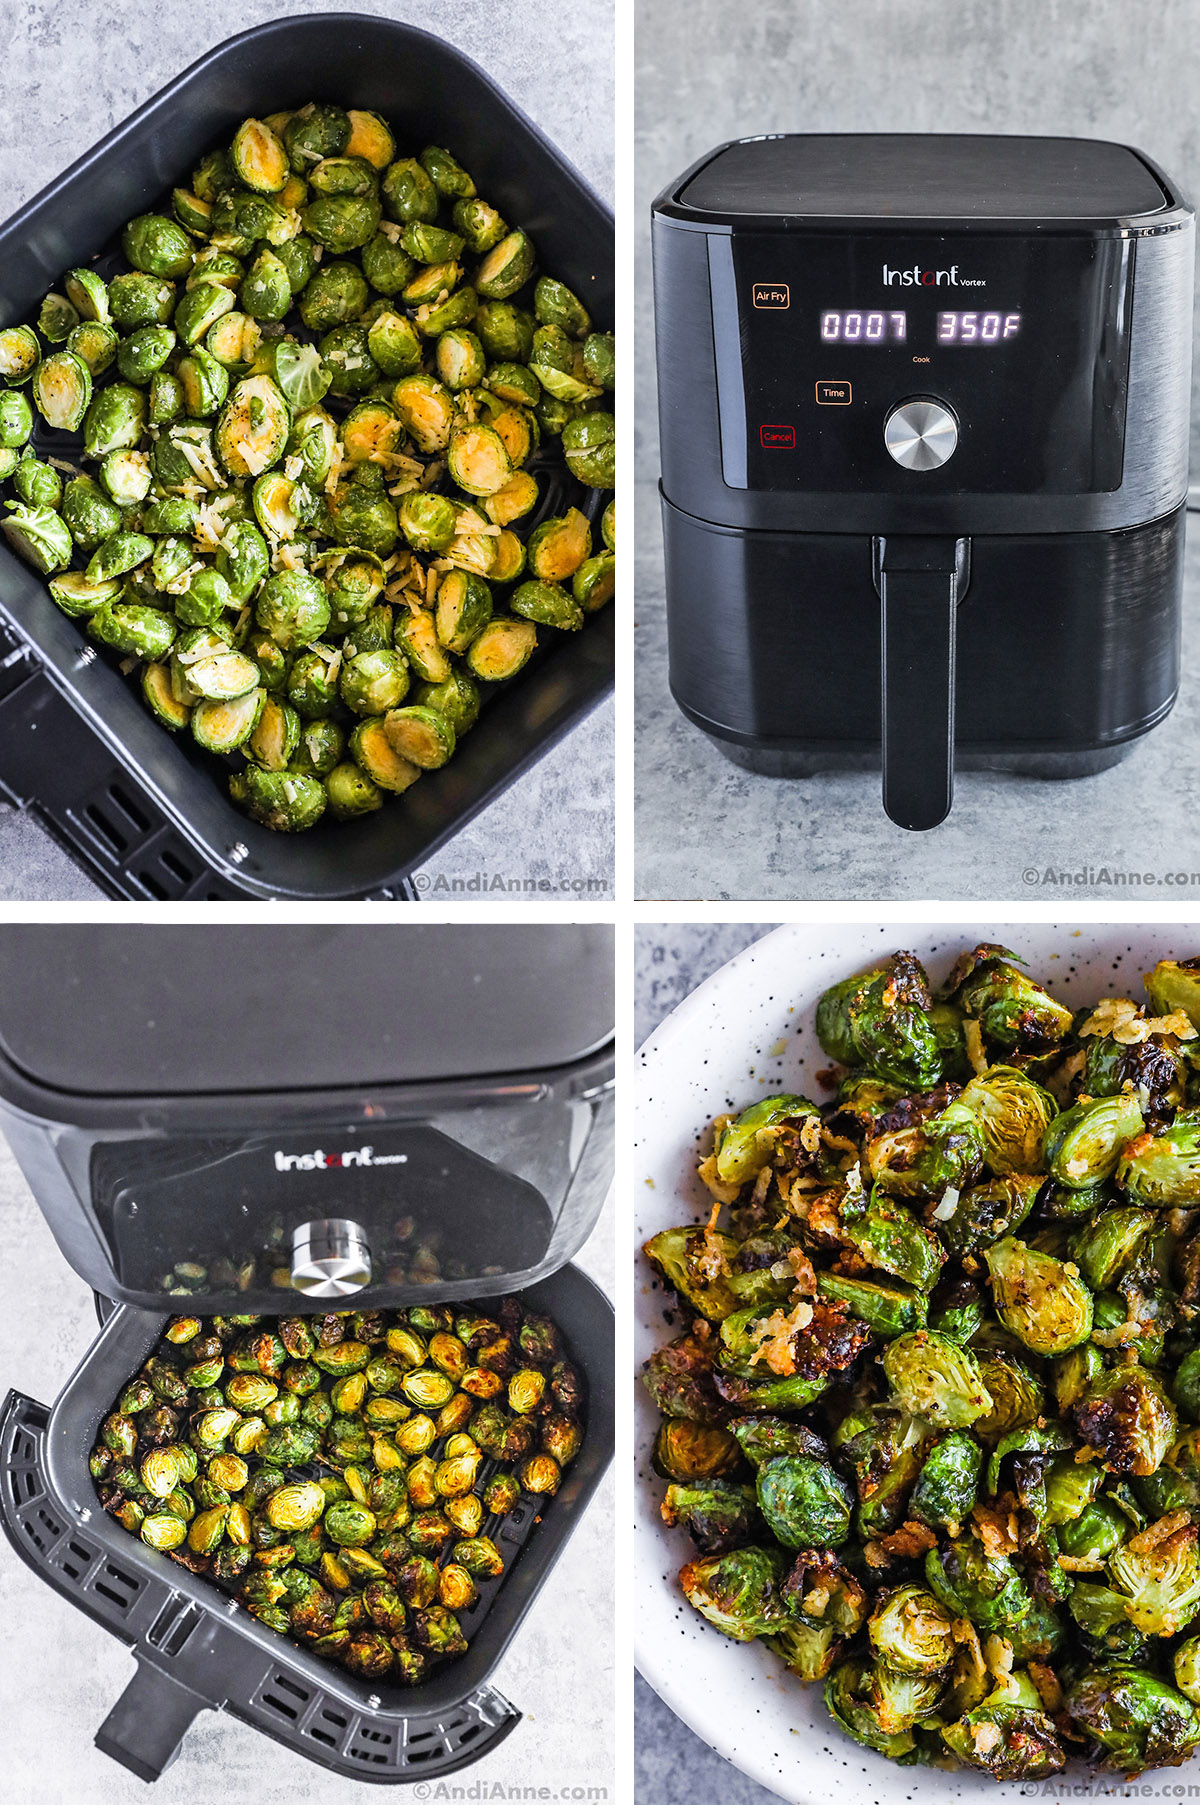 Air fryer basket with brussels sprouts, an air fryer, and a bowl of crispy brussels sprouts.